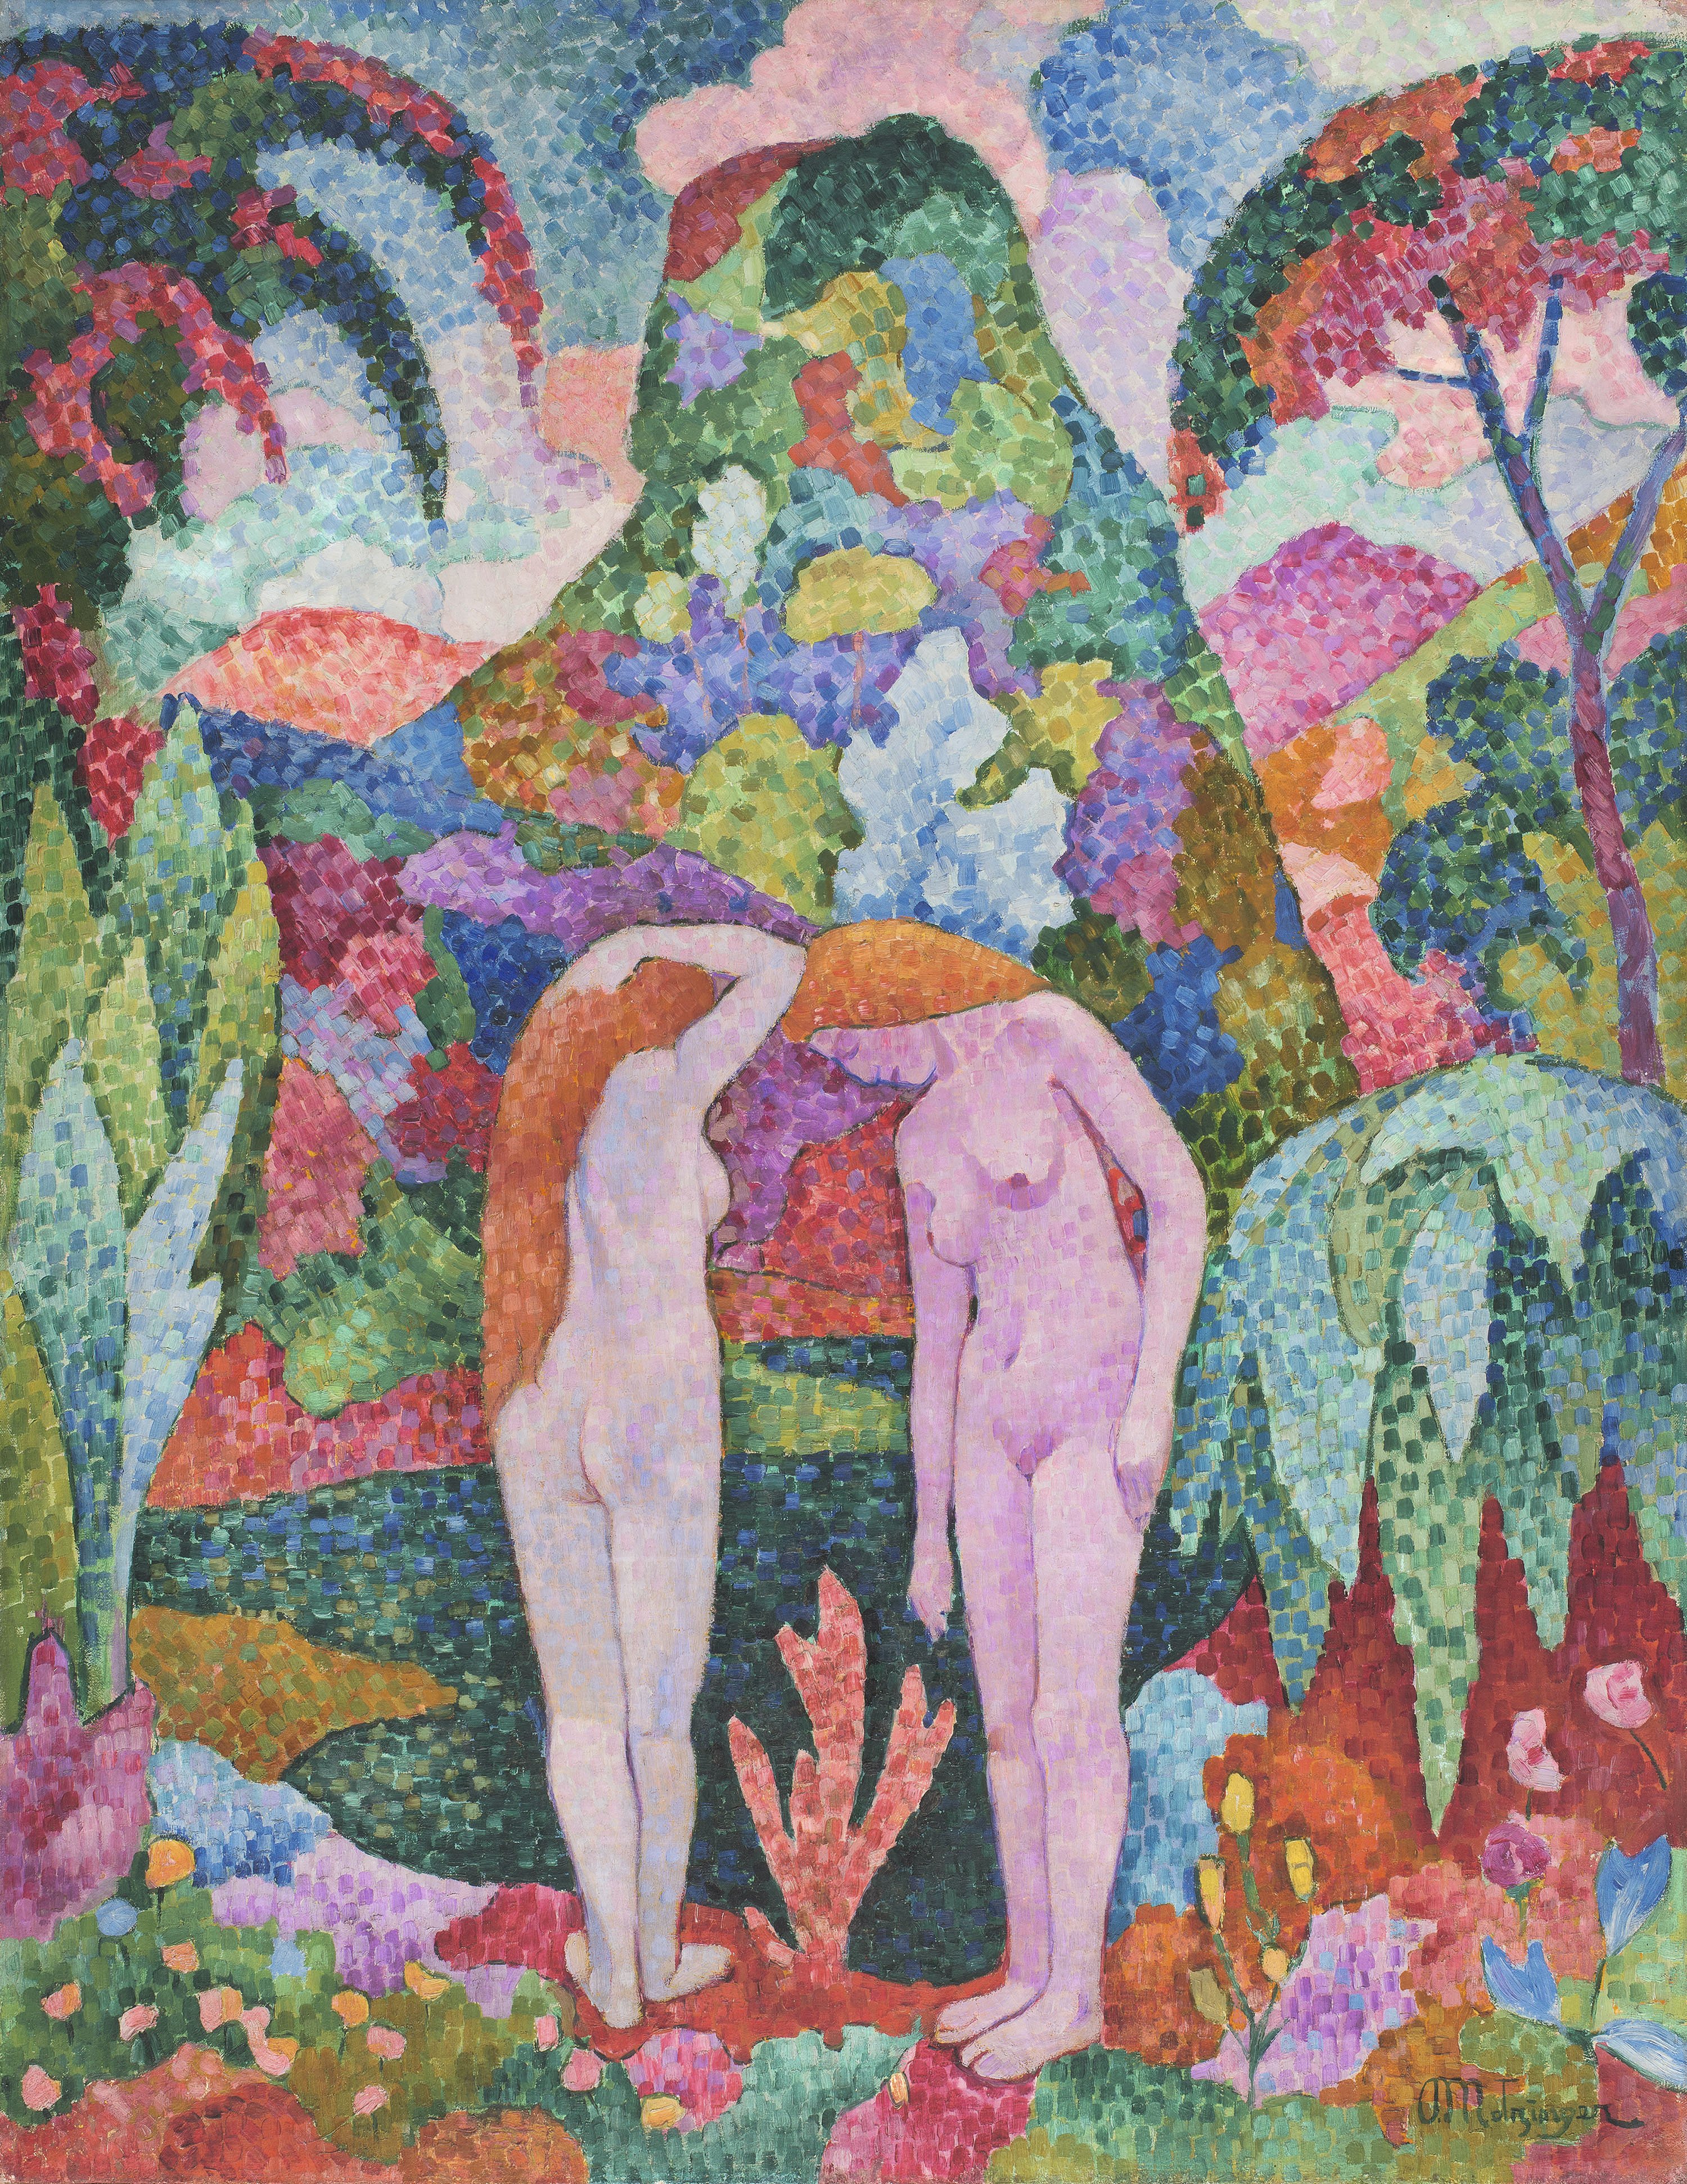 Bathers. Two Nudes in an Exotic Landscape. Jean Metzinger